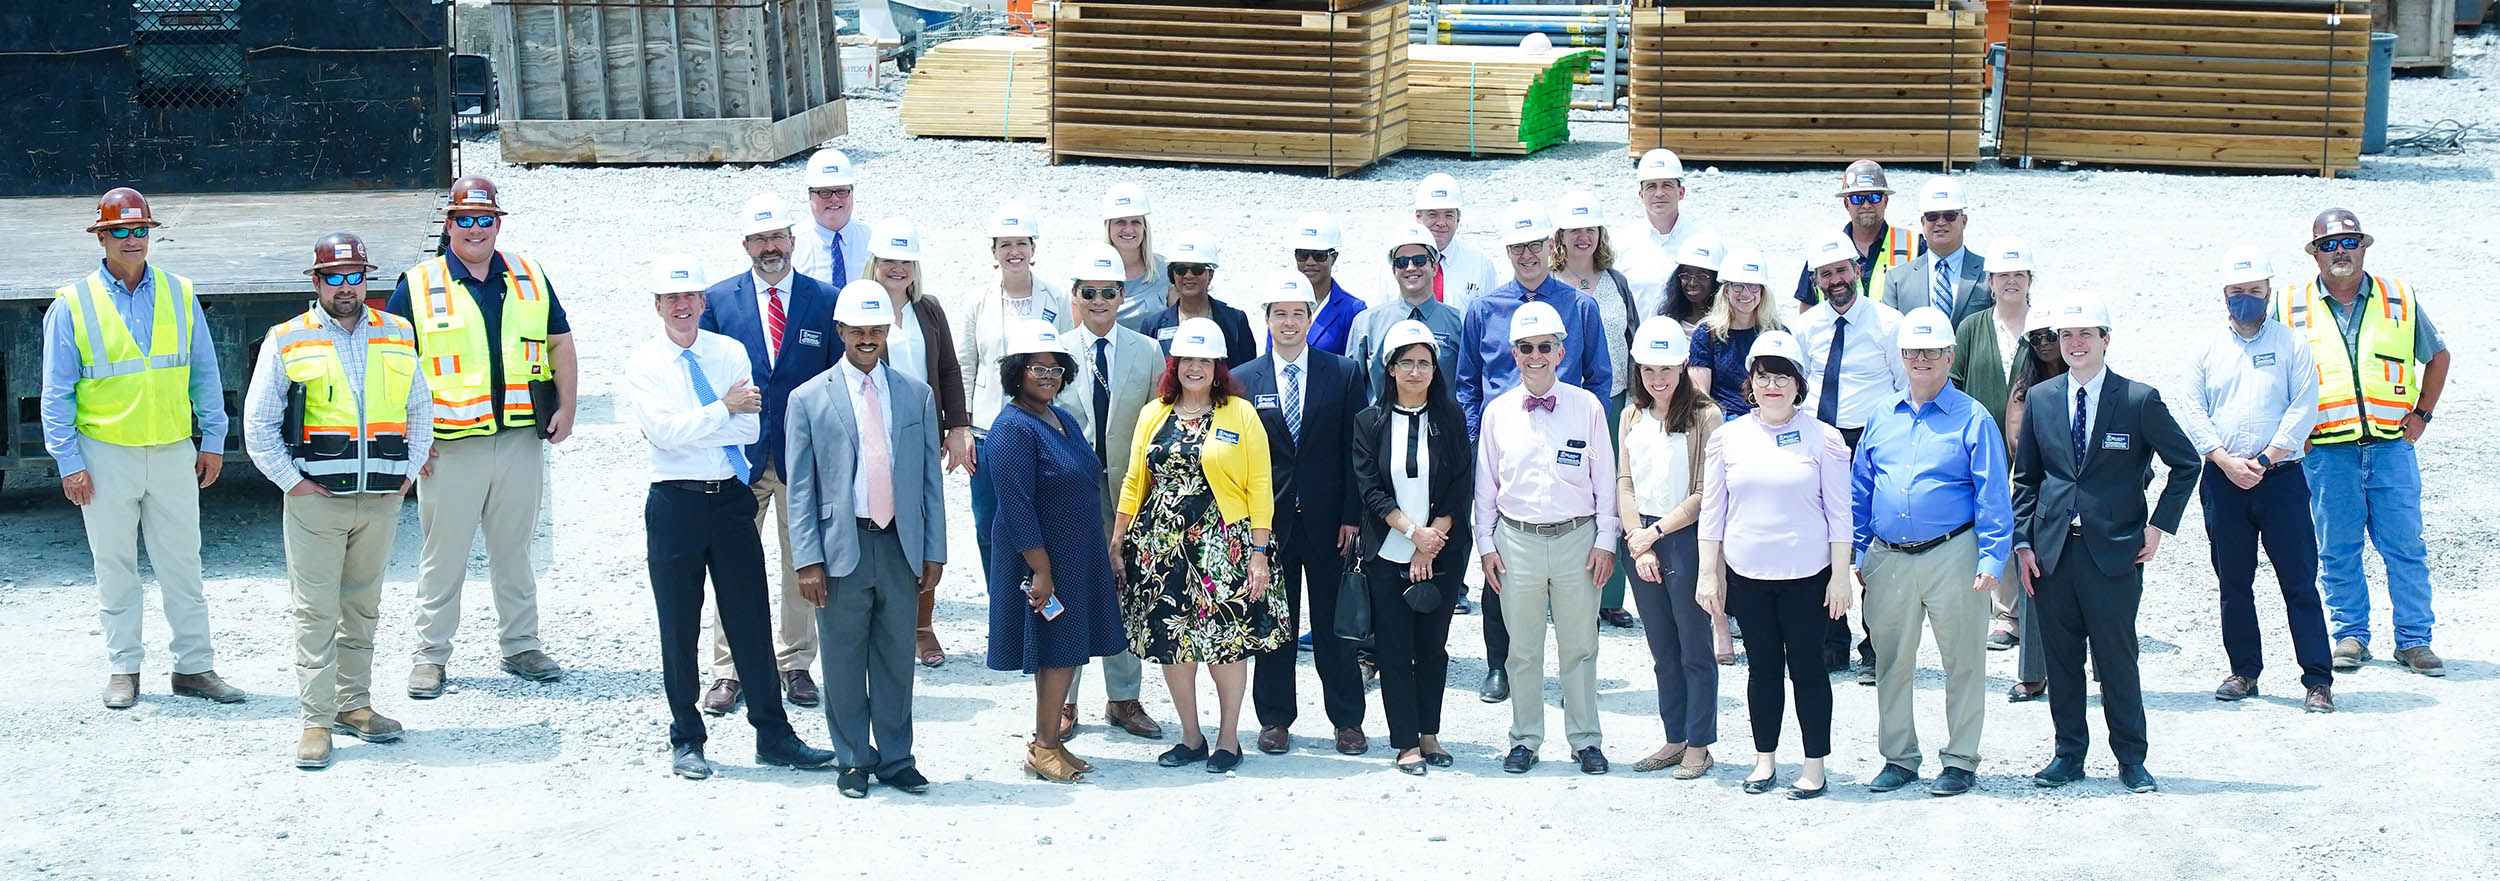 The Medical School team takes a tour of the job site of The Thomas F. Frist, Jr. College of Medicine at Belmont University